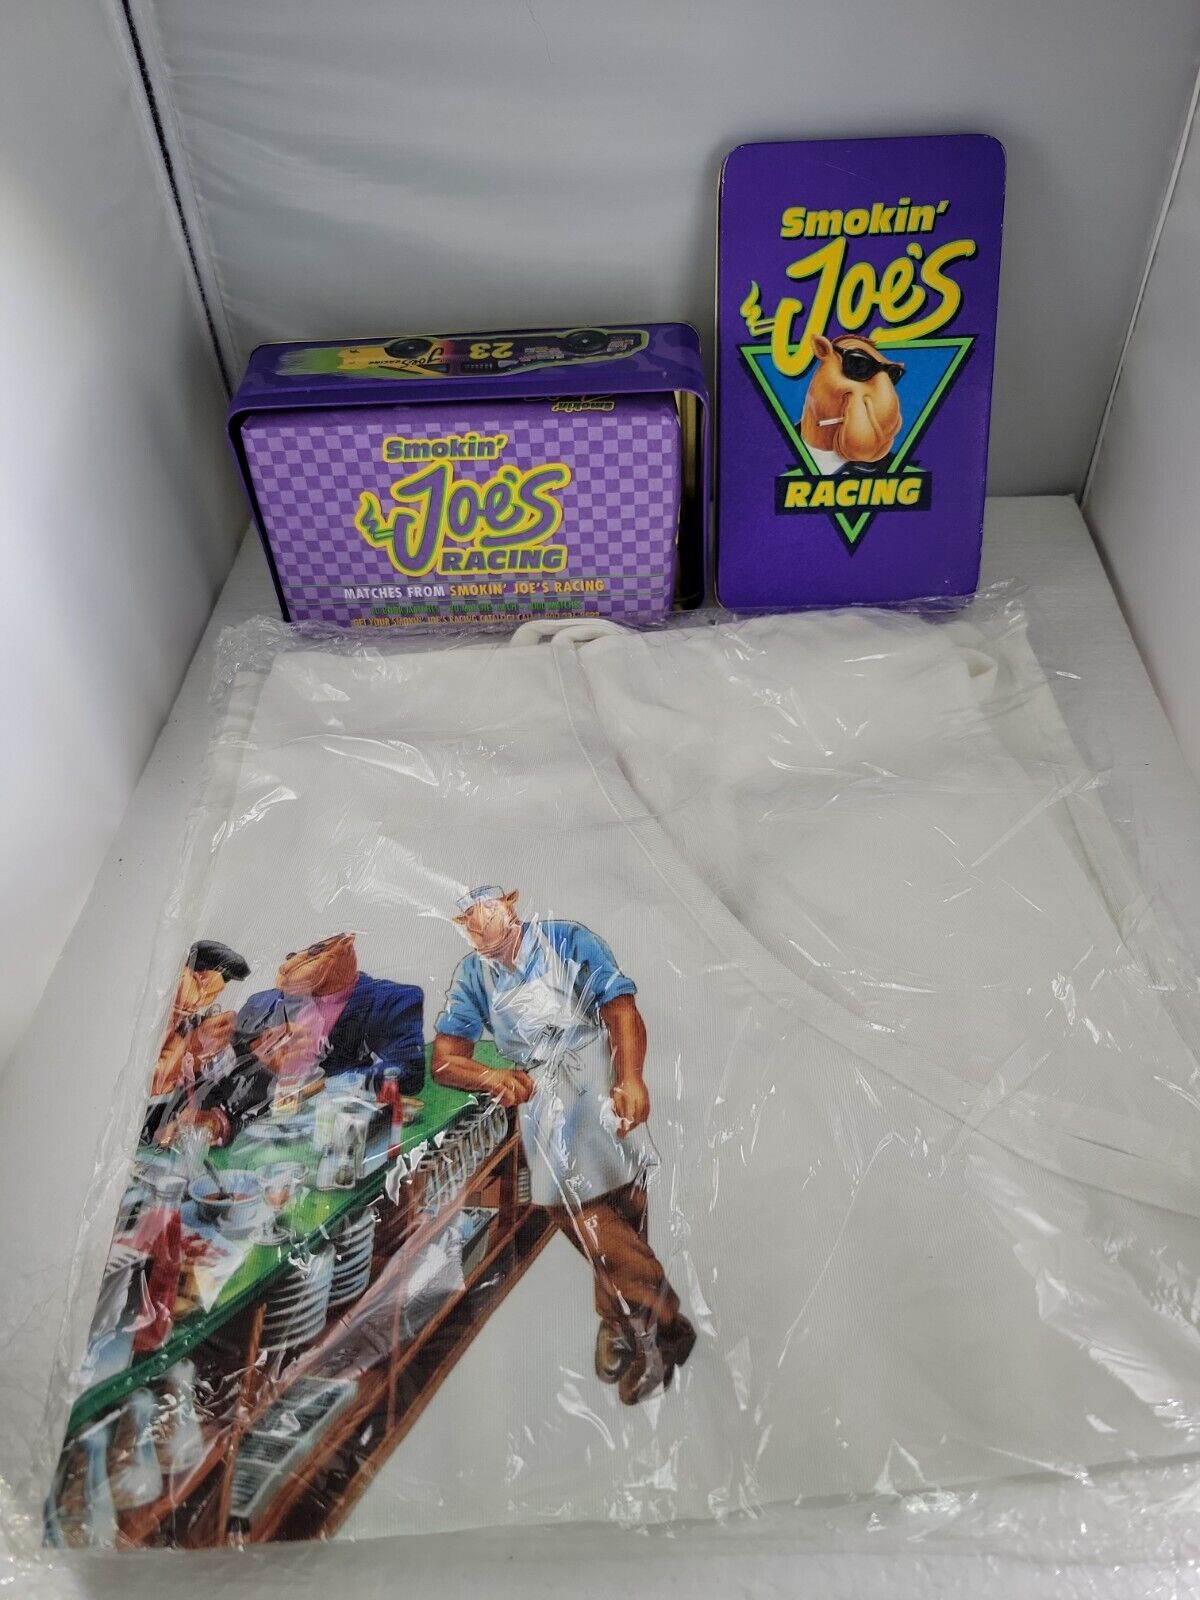 1993 Joe Camel Open 24 Joes Diner Tie Back White Apron and Joe's Matches (TK).